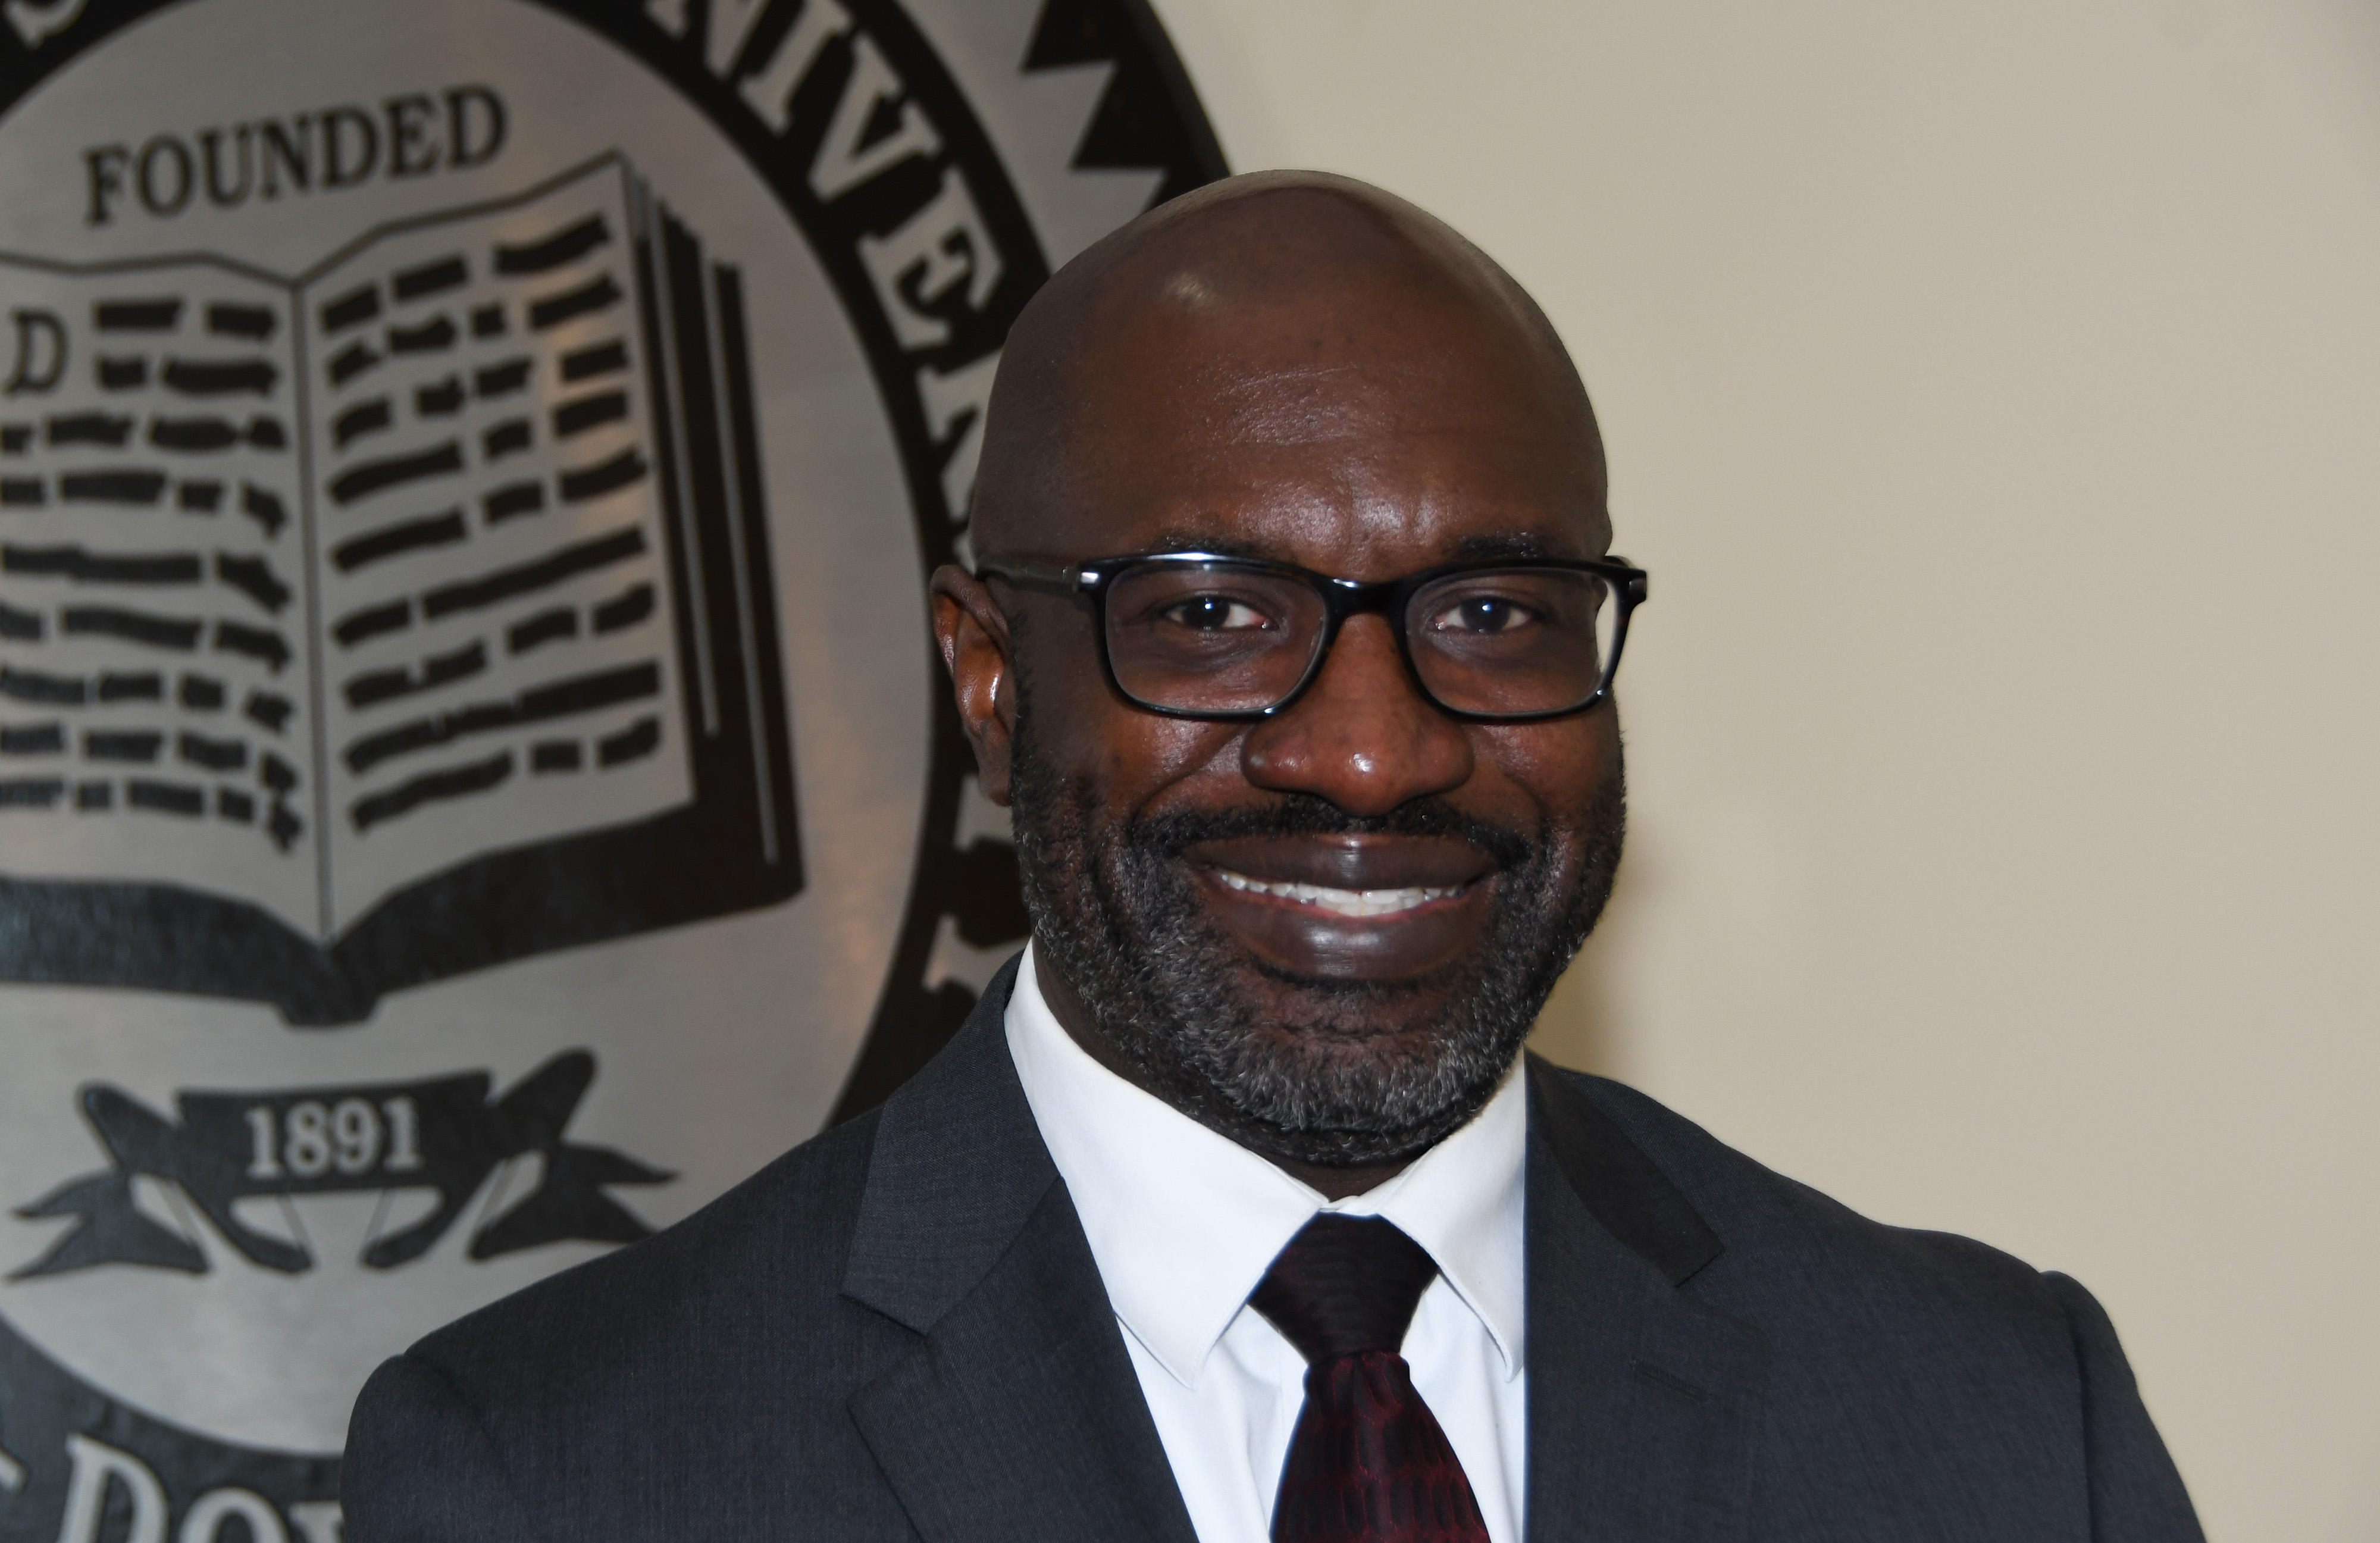 Cleon Cauley Esq. is the new University General Counsel, an 16-year attorney with a wealth of governmental experiences